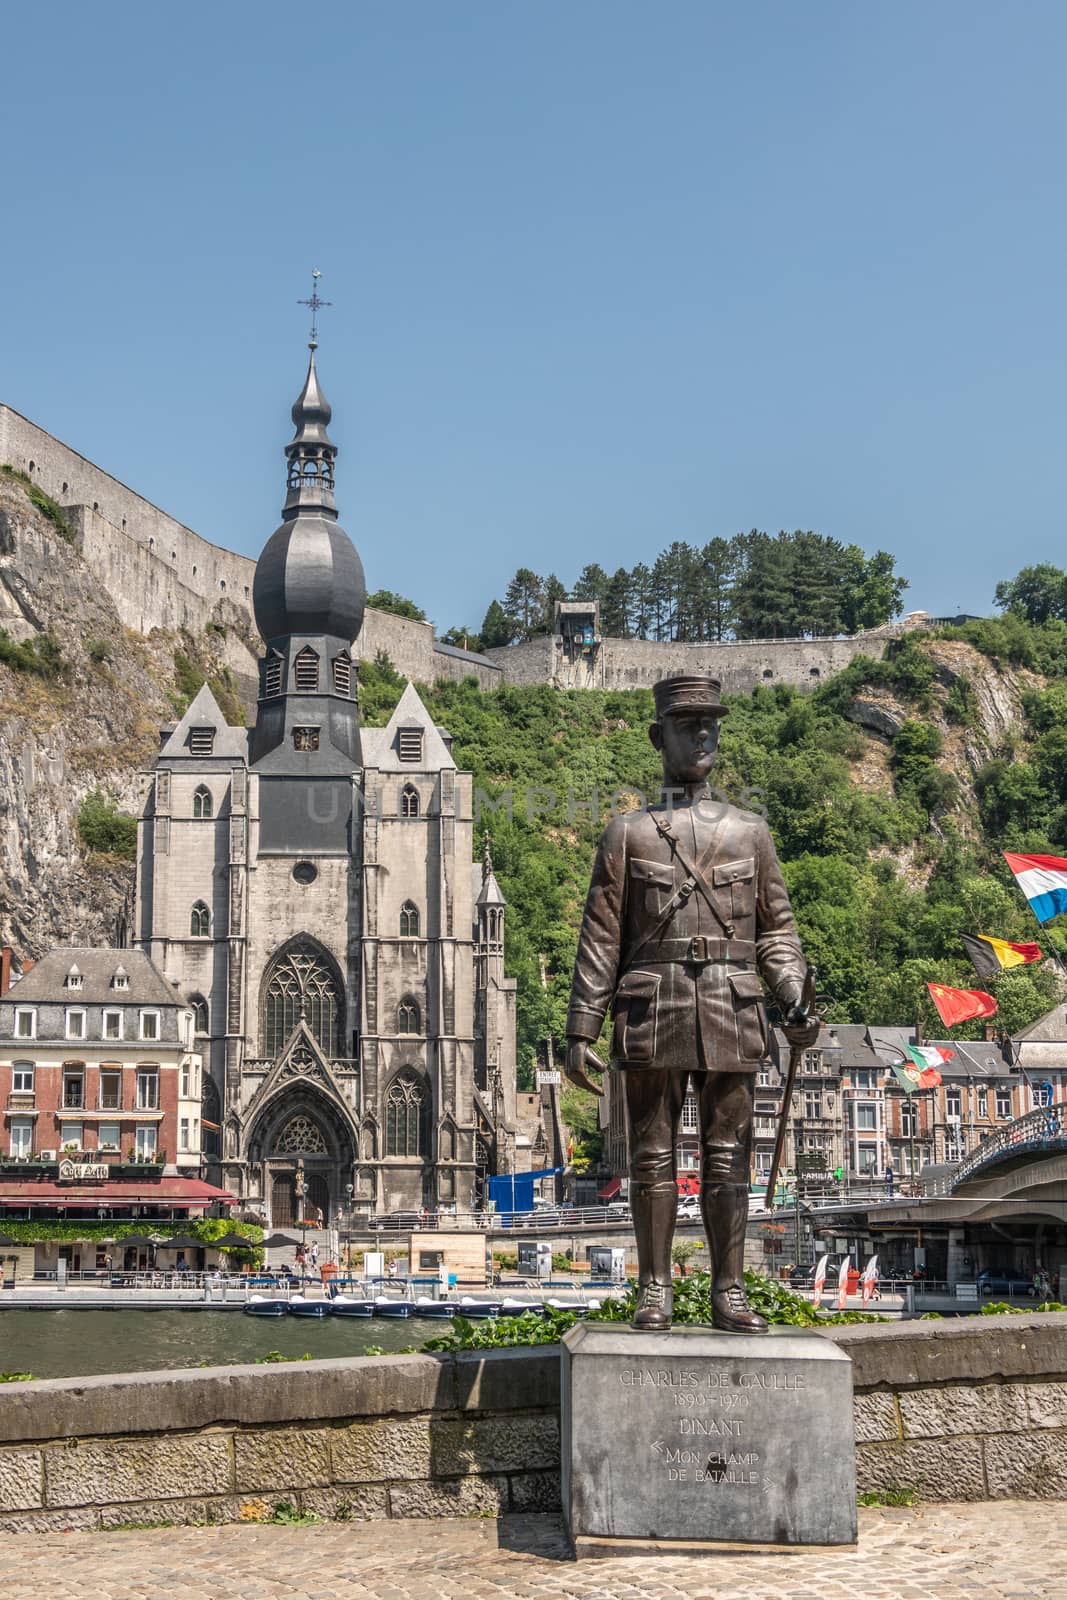 Notre Dame Church and Charles de Gaulle statue in Dinant, Belgiu by Claudine